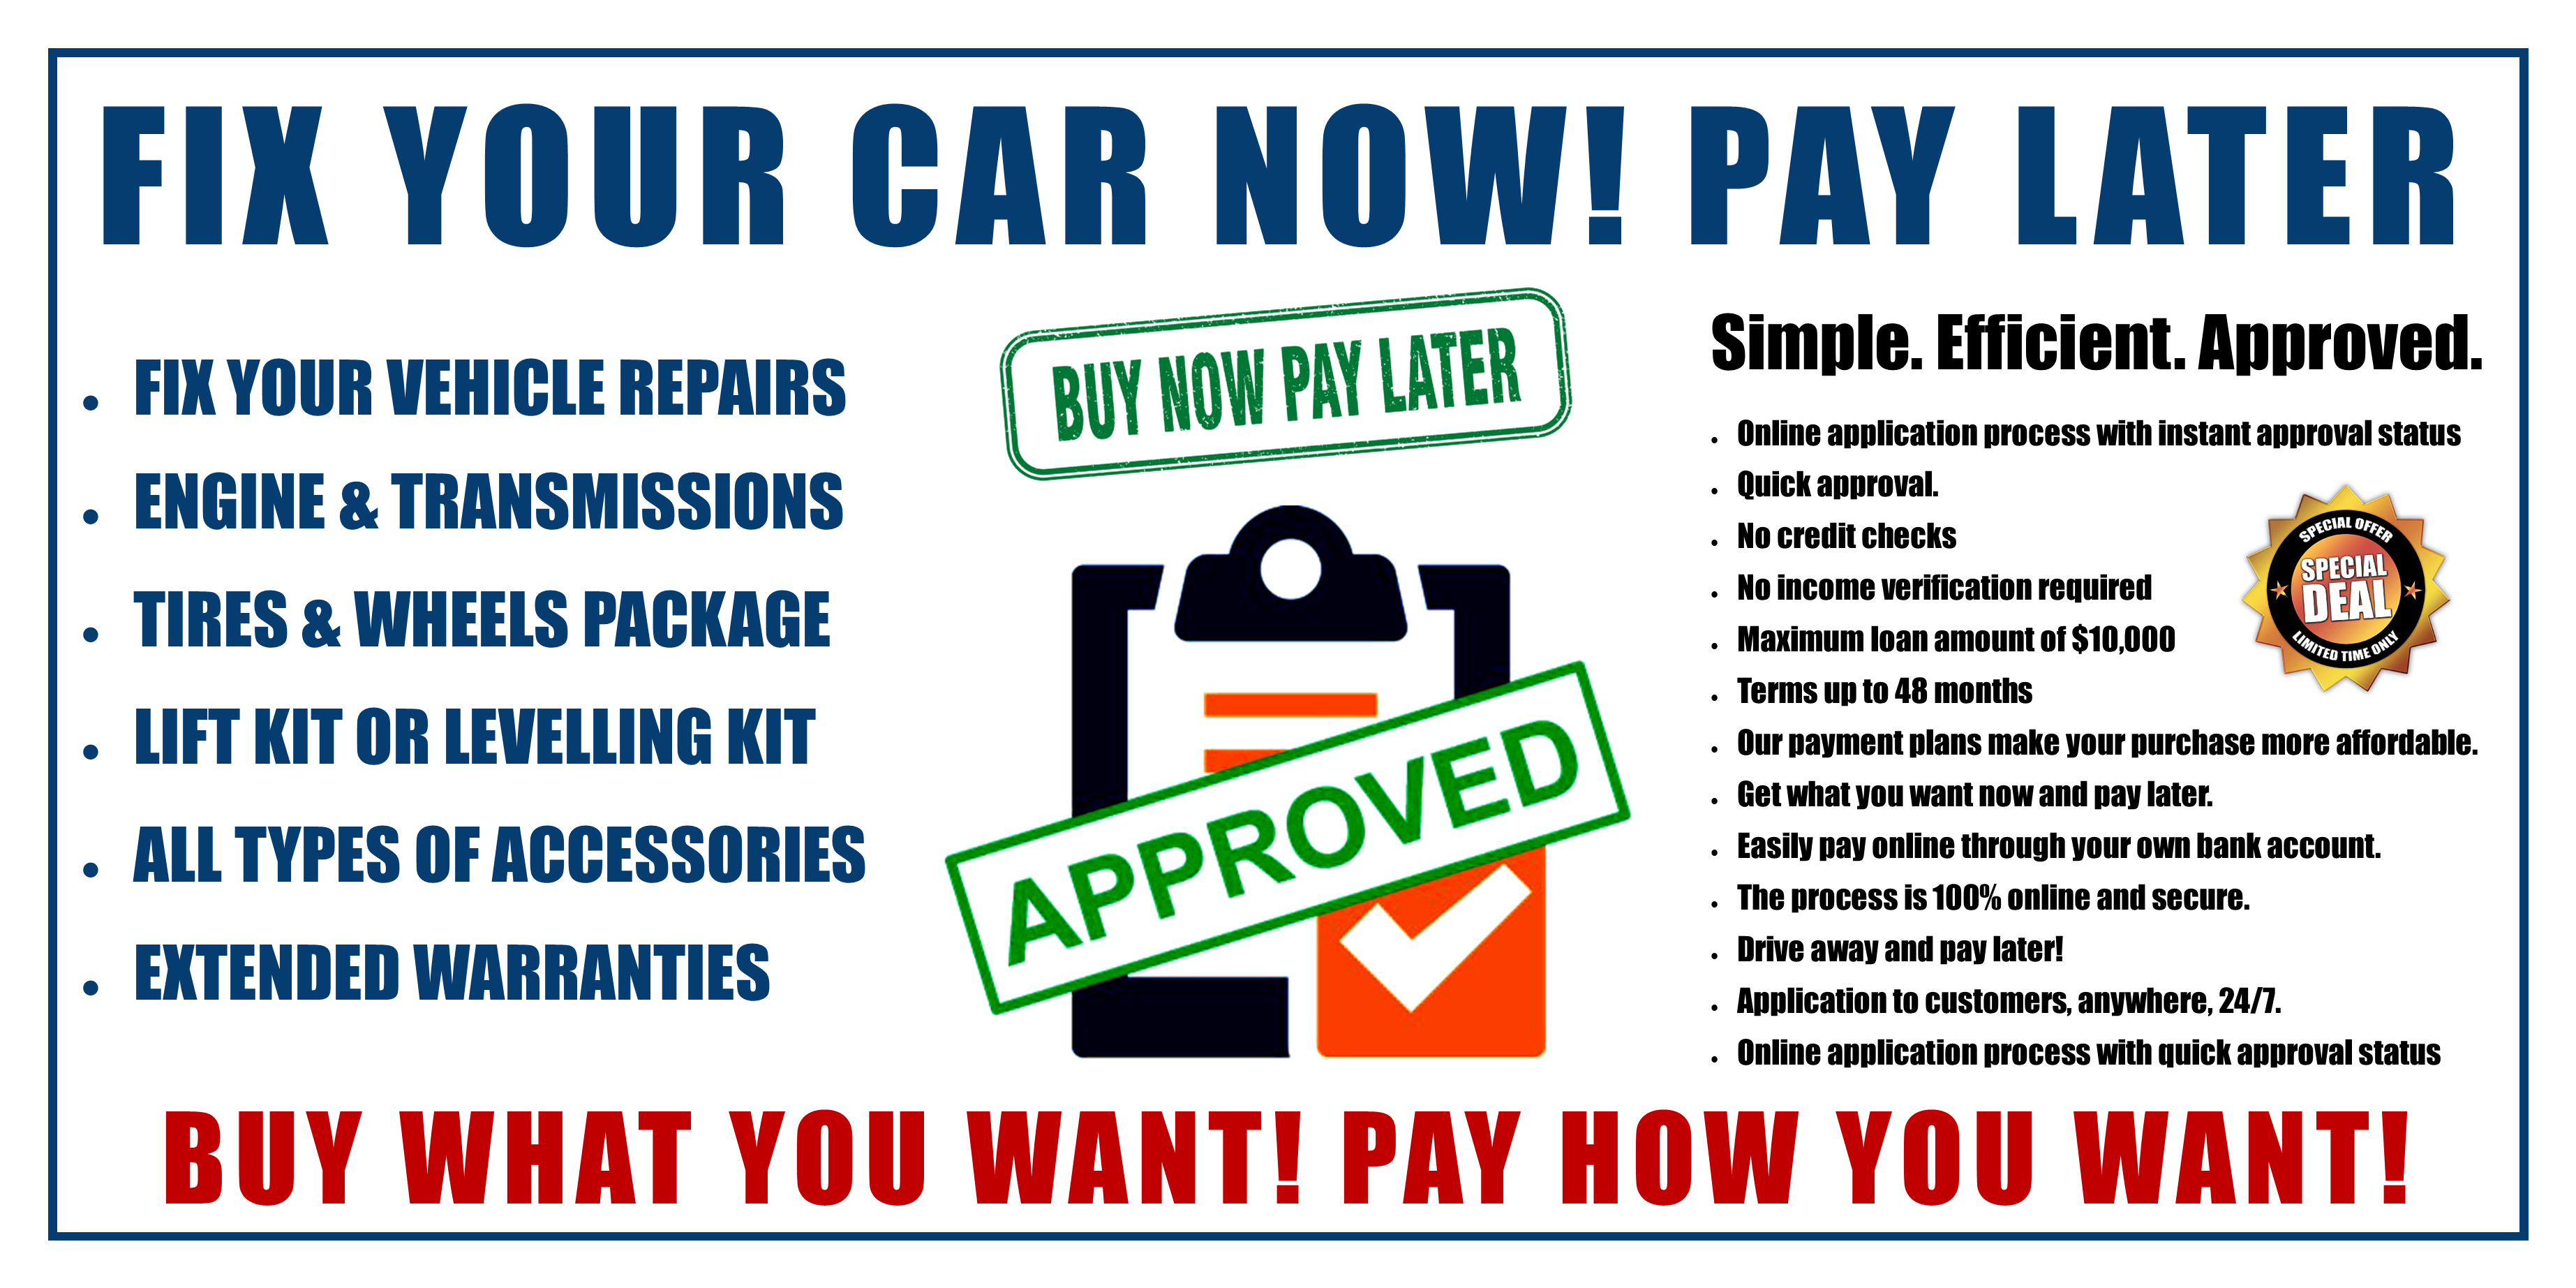 Canadian Auto Remarketing - Sales/Repairs/Tires/Napa Auto Care Provides the Following Automotive Services